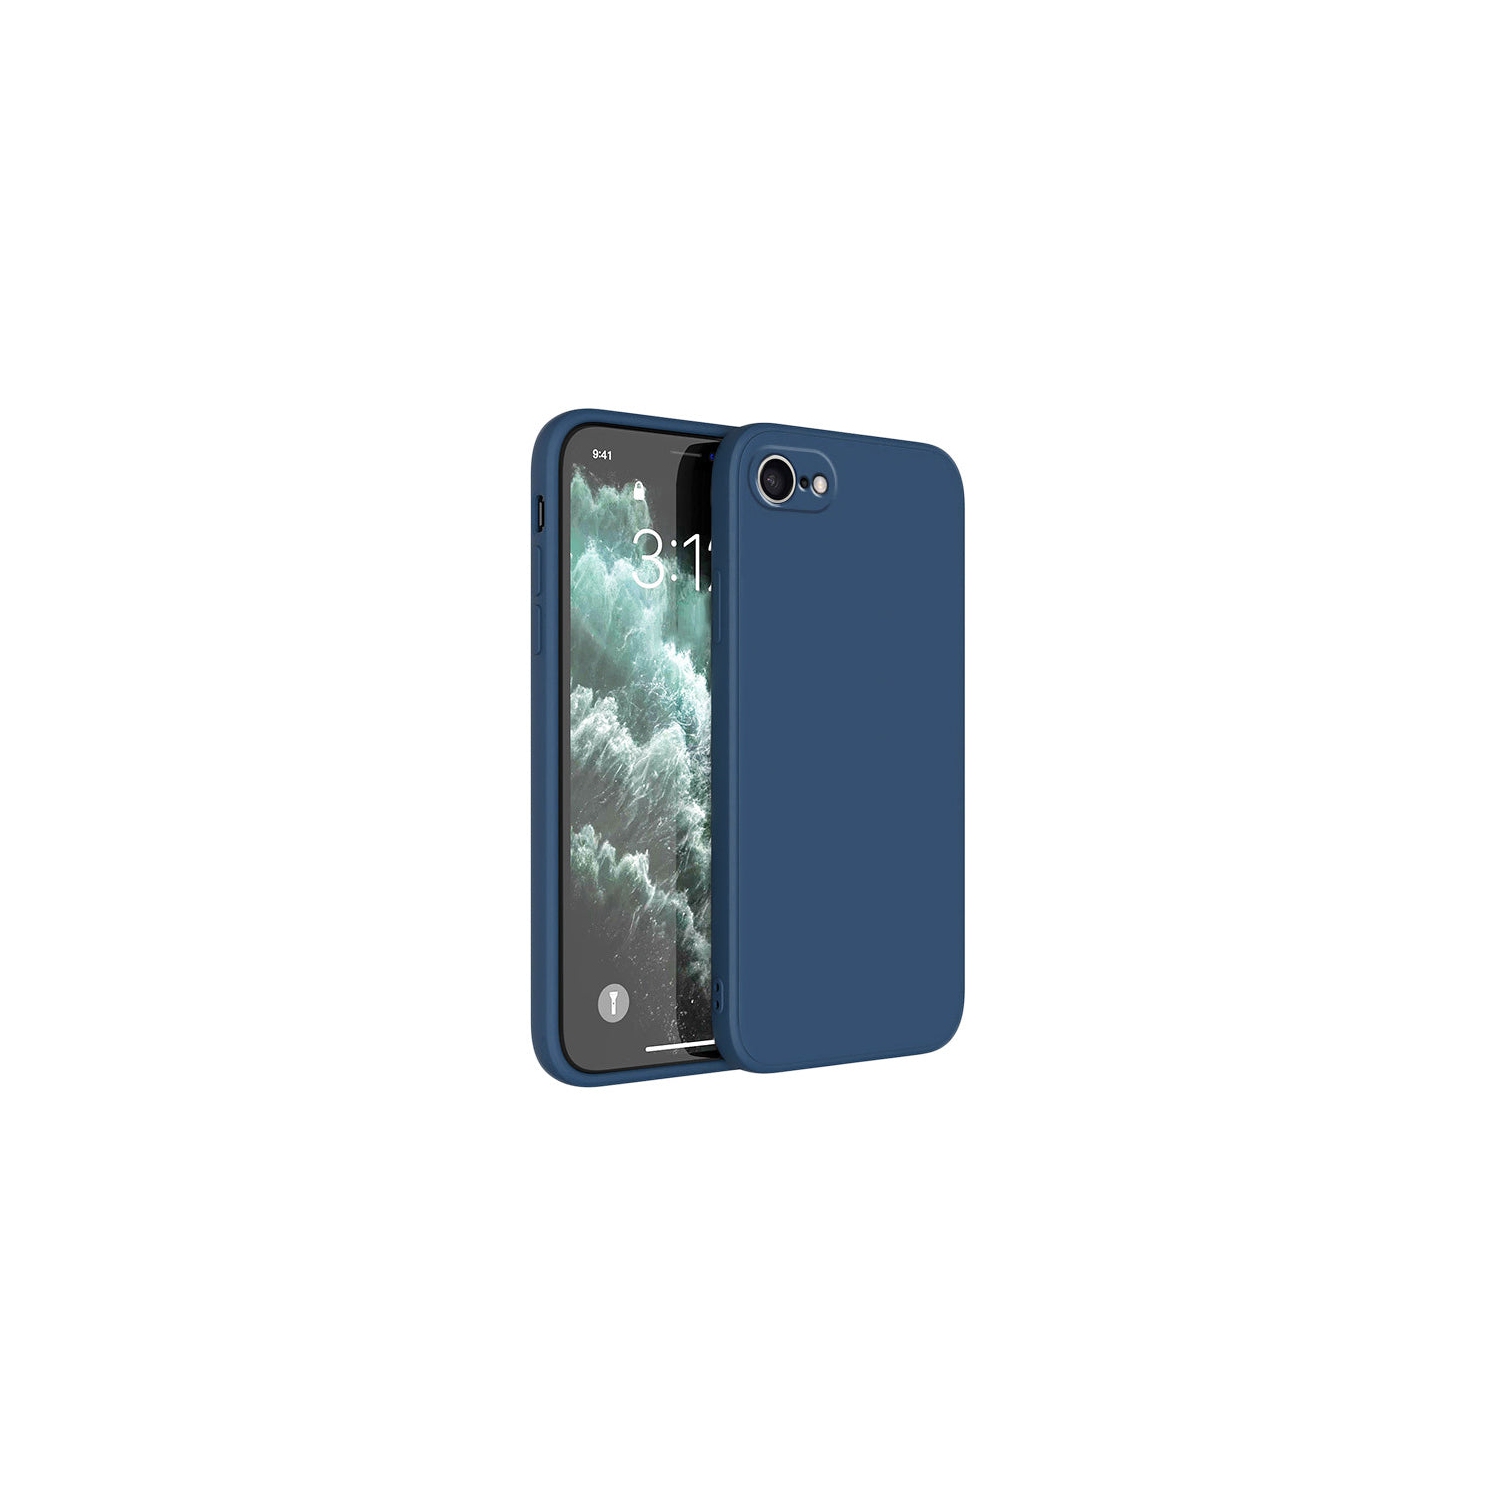 PANDACO Soft Shell Matte Navy Case for iPhone 6 Plus or iPhone 6S Plus